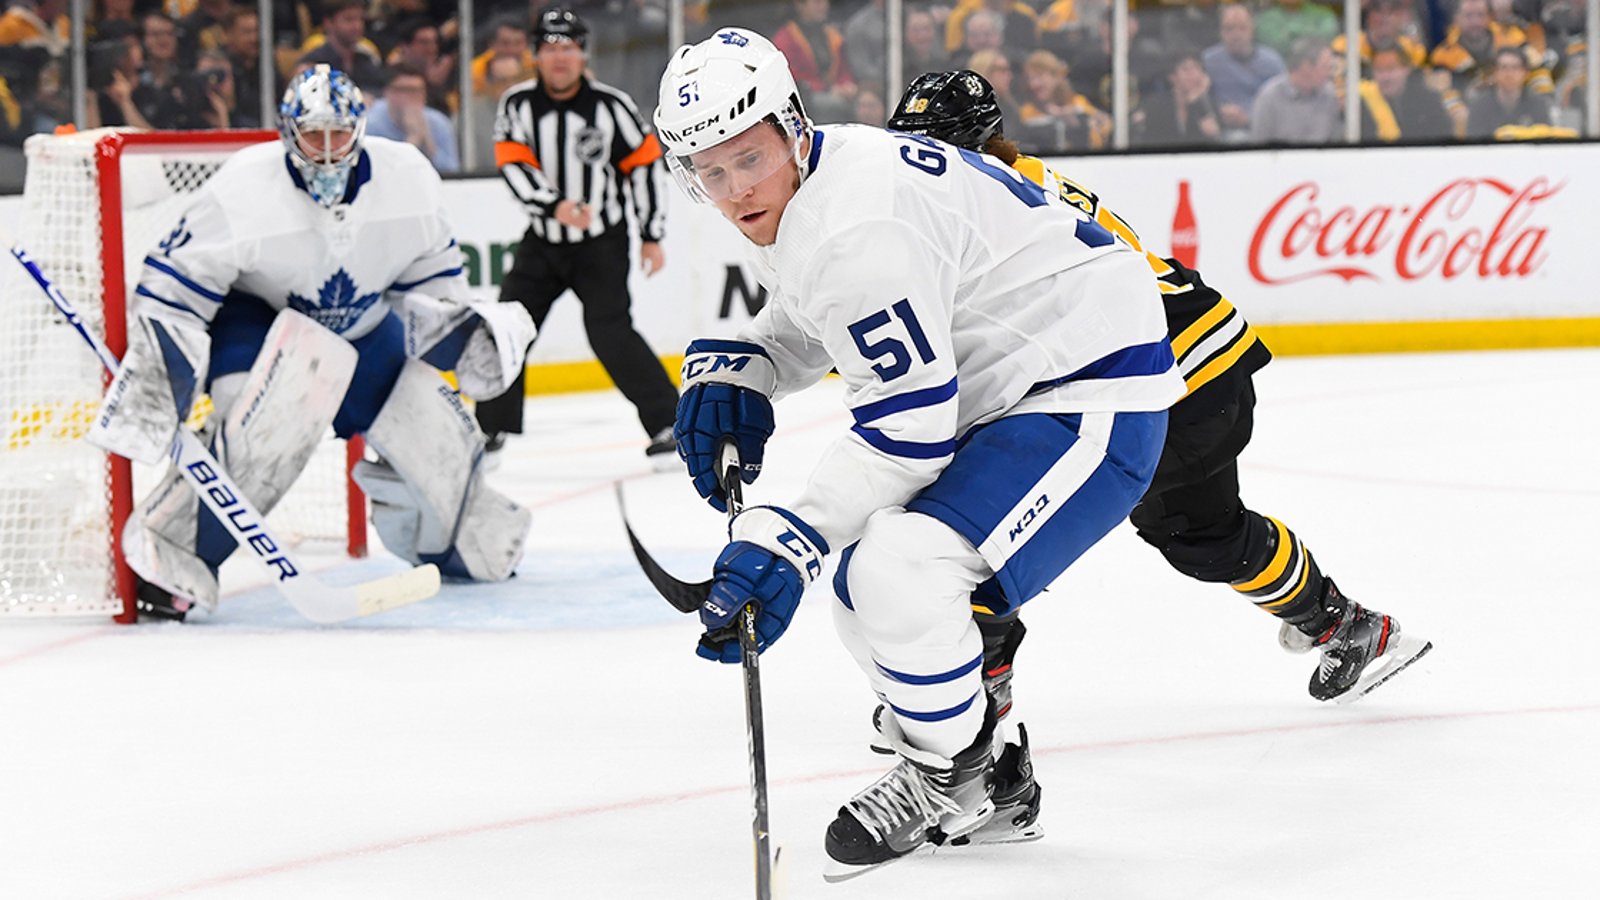 Report: Jake Gardiner has played his last game for the Leafs